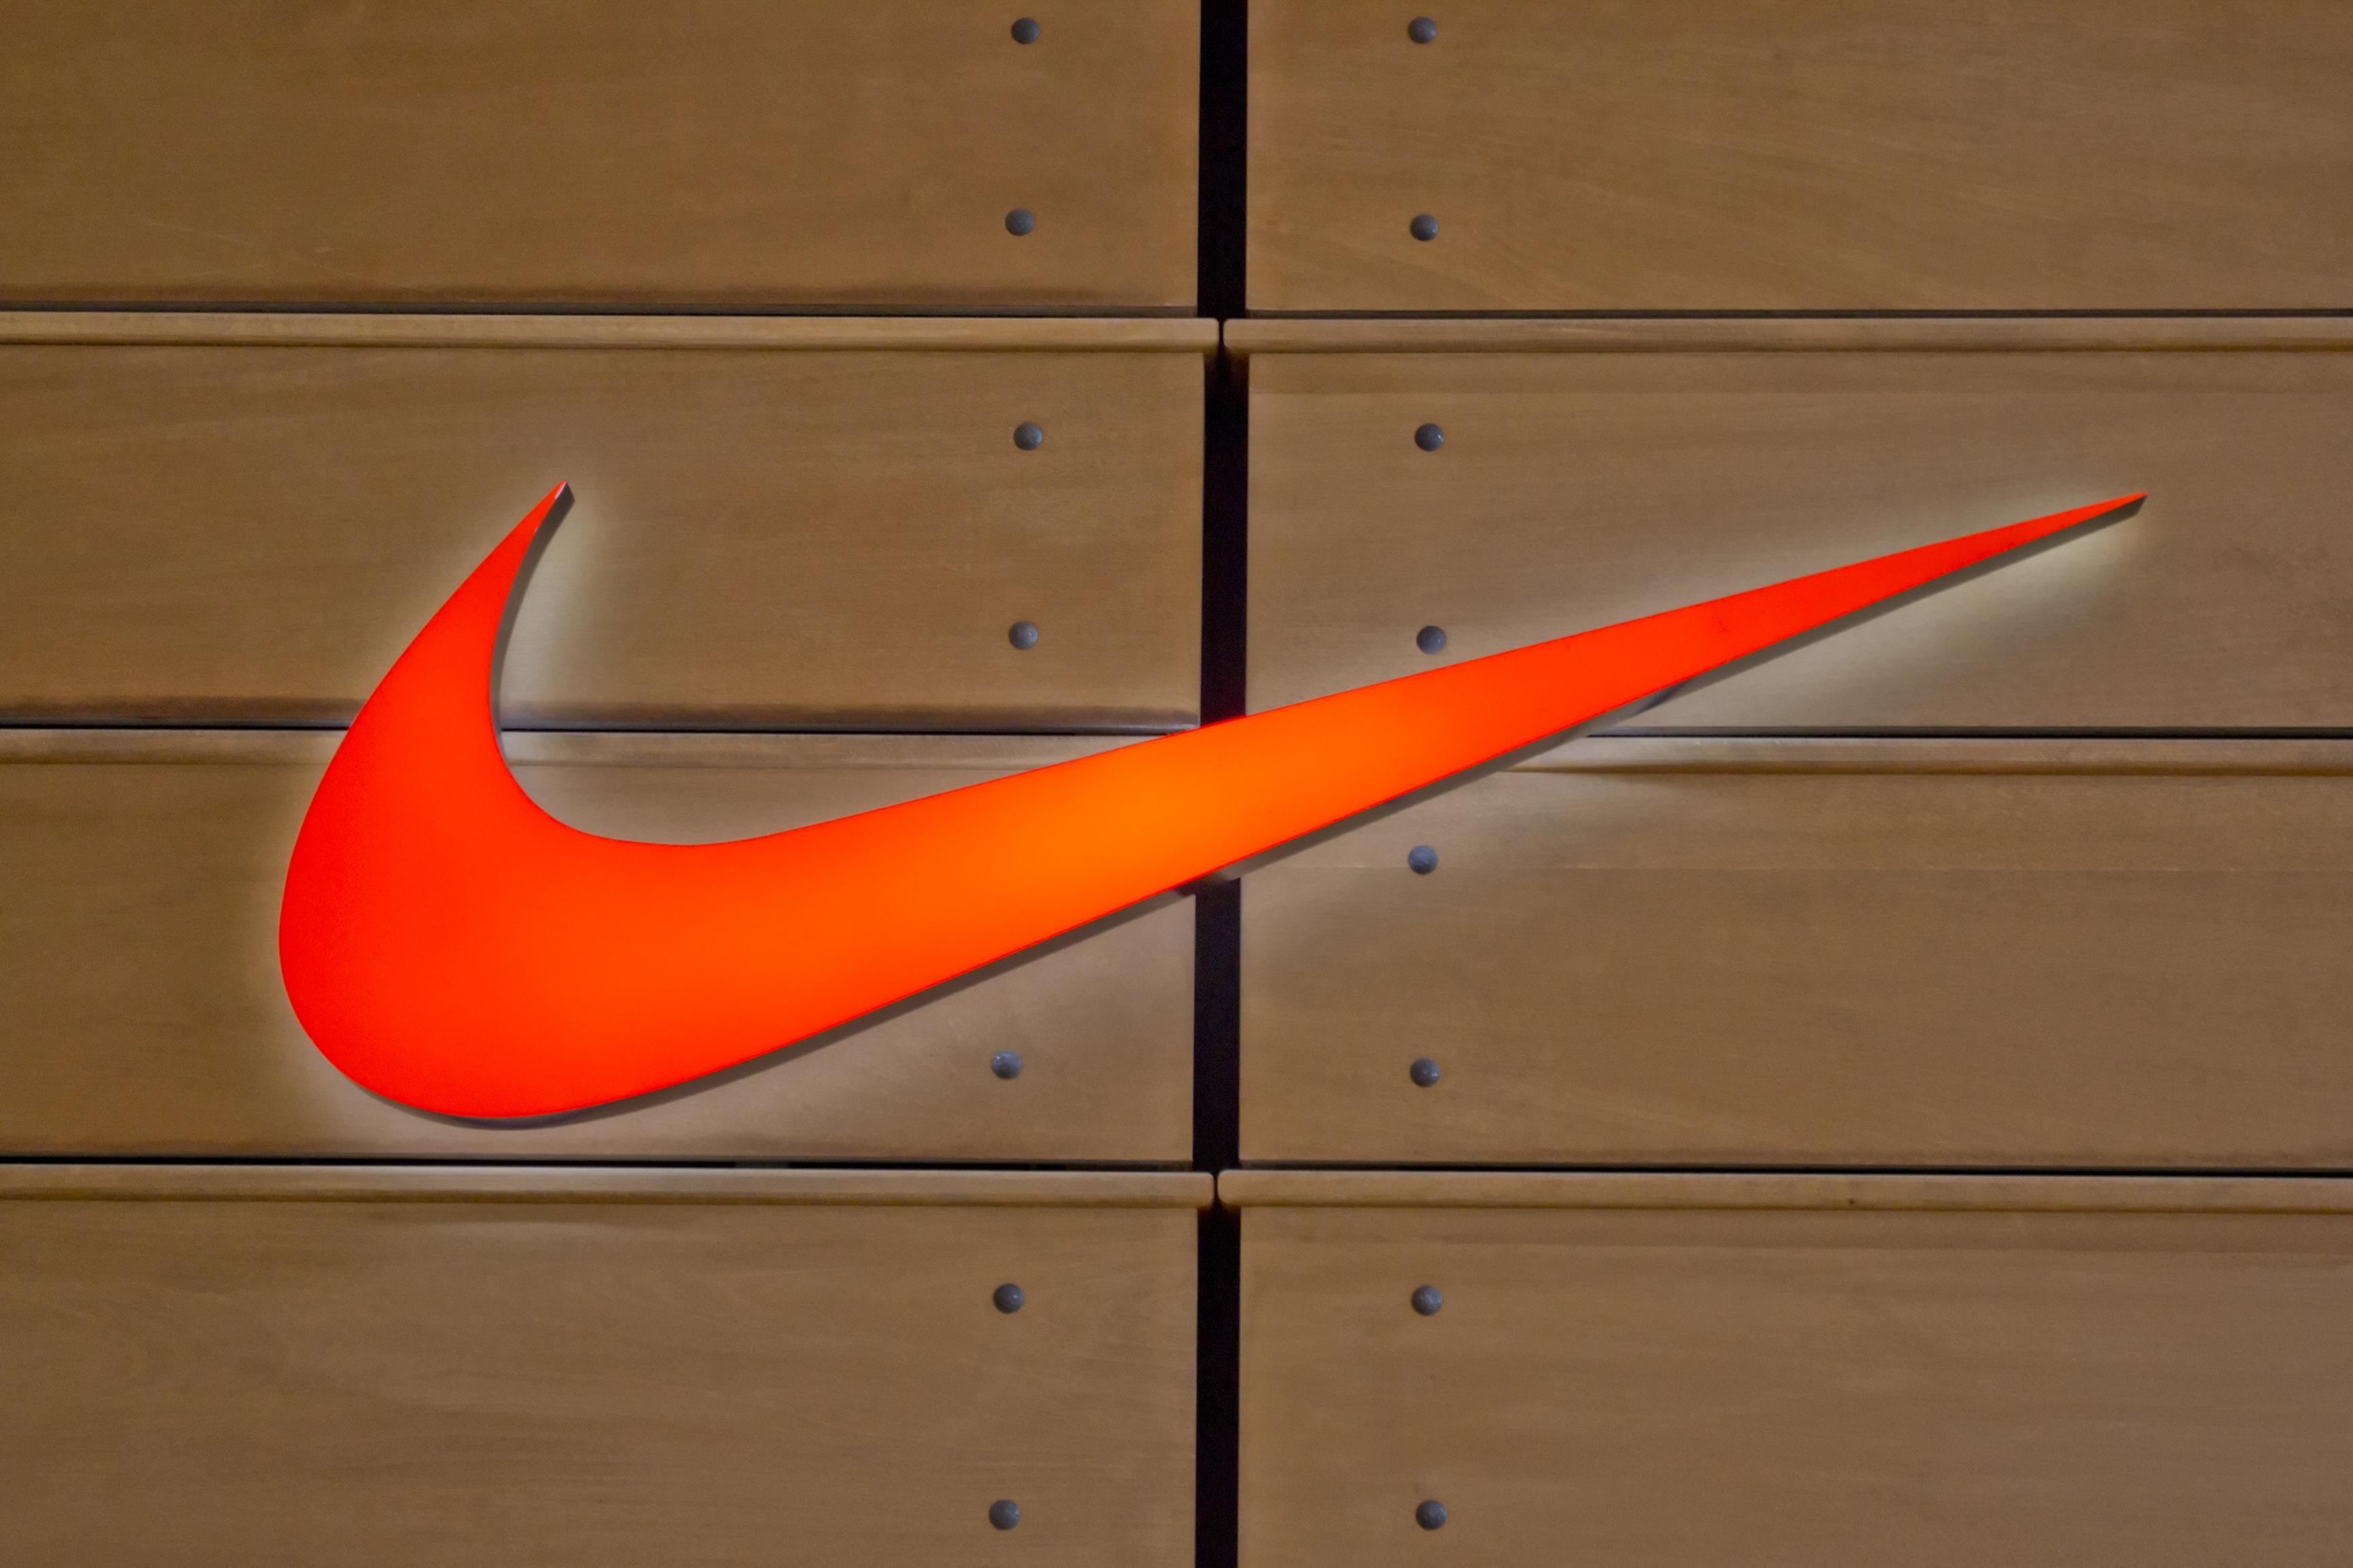 Today only: Get a FREE $10 Newegg gift card with purchase of $50 Nike gift card